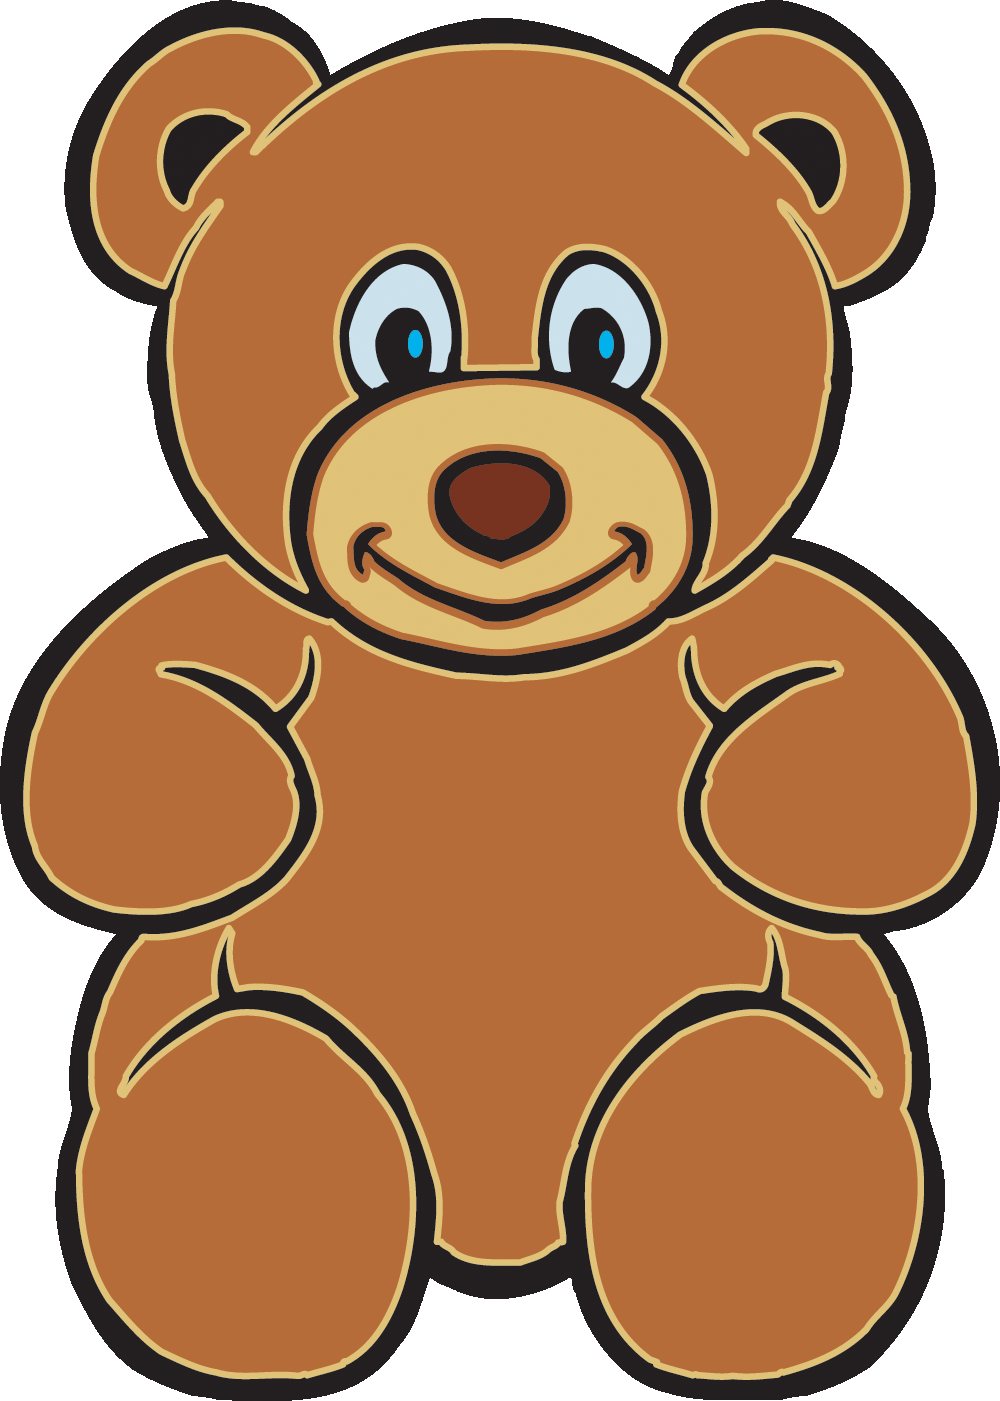 Cute Brown Bear Clipart | Clipart library - Free Clipart Images